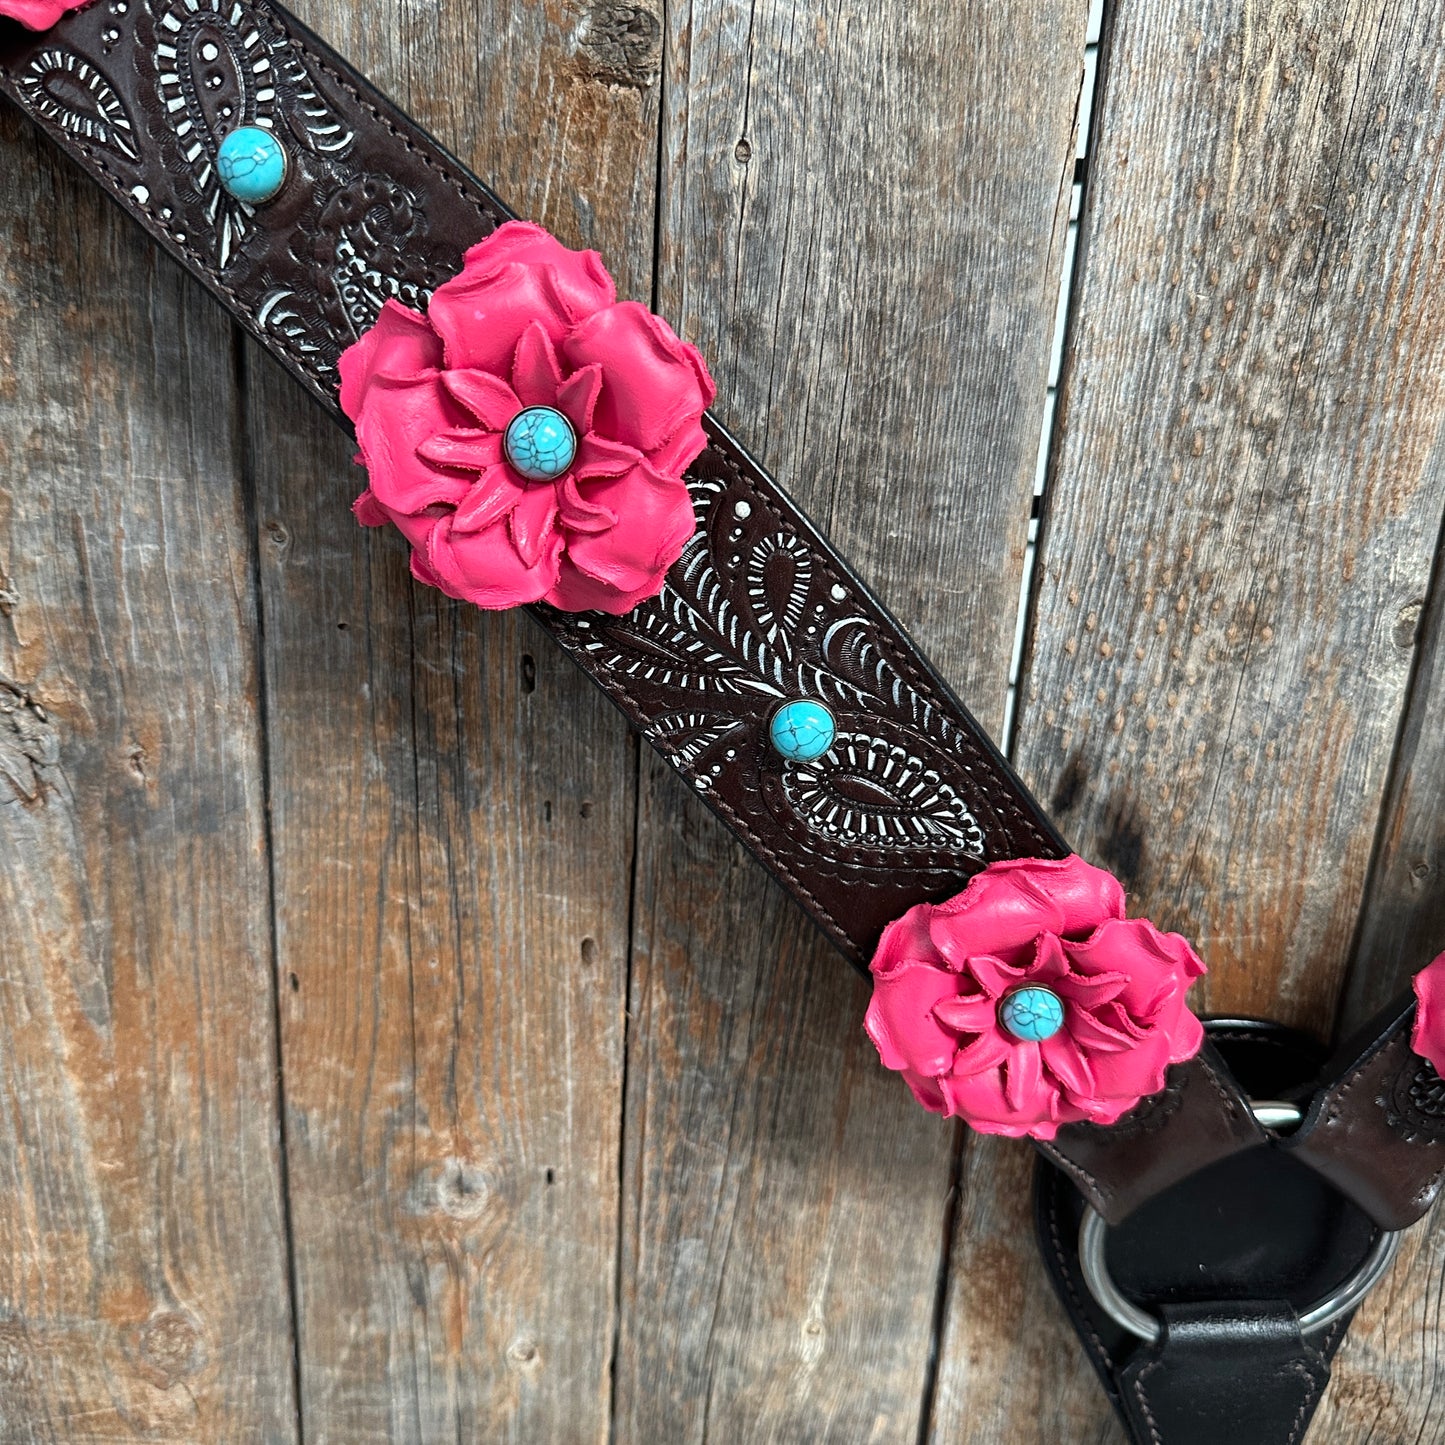 Hand Painted Paisley Neon Pink & Turquoise One Ear/ Breastcollar Tack Set #OEBC571